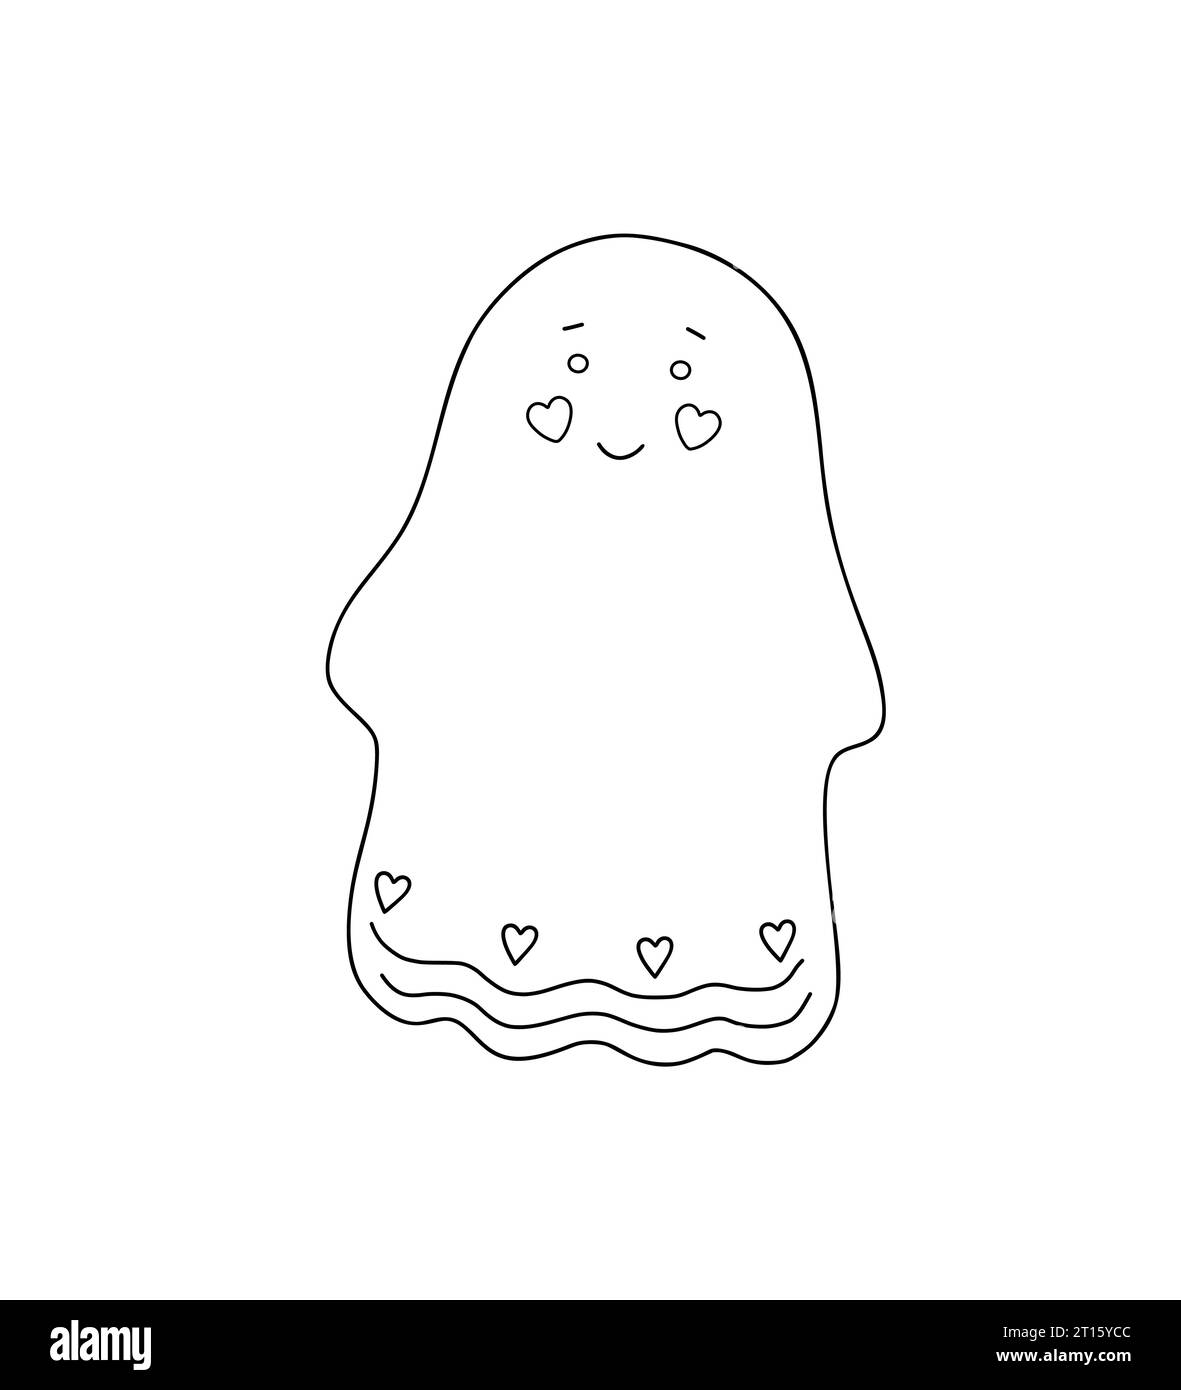 Little cute outline ghost with face emotions vector illustration doodle spooky simple fancy character for Halloween holiday celebrations, banner, fairy tale character decor Stock Vector